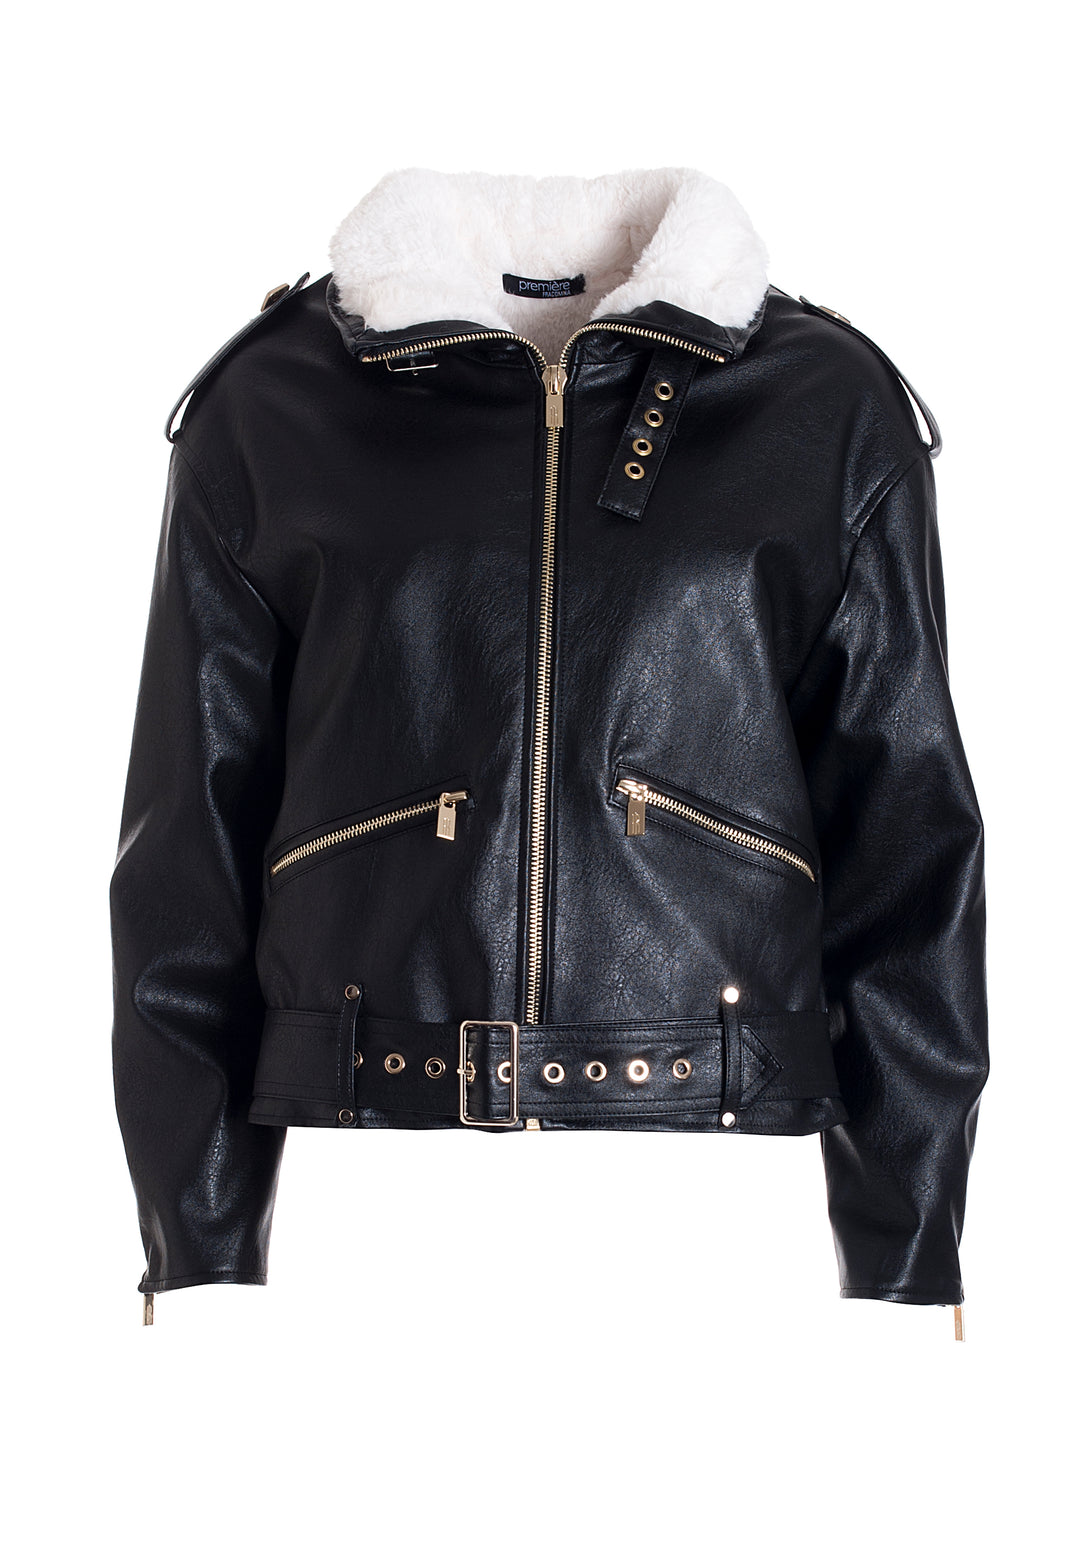 Aviator style jacket regular fit made in fake leather